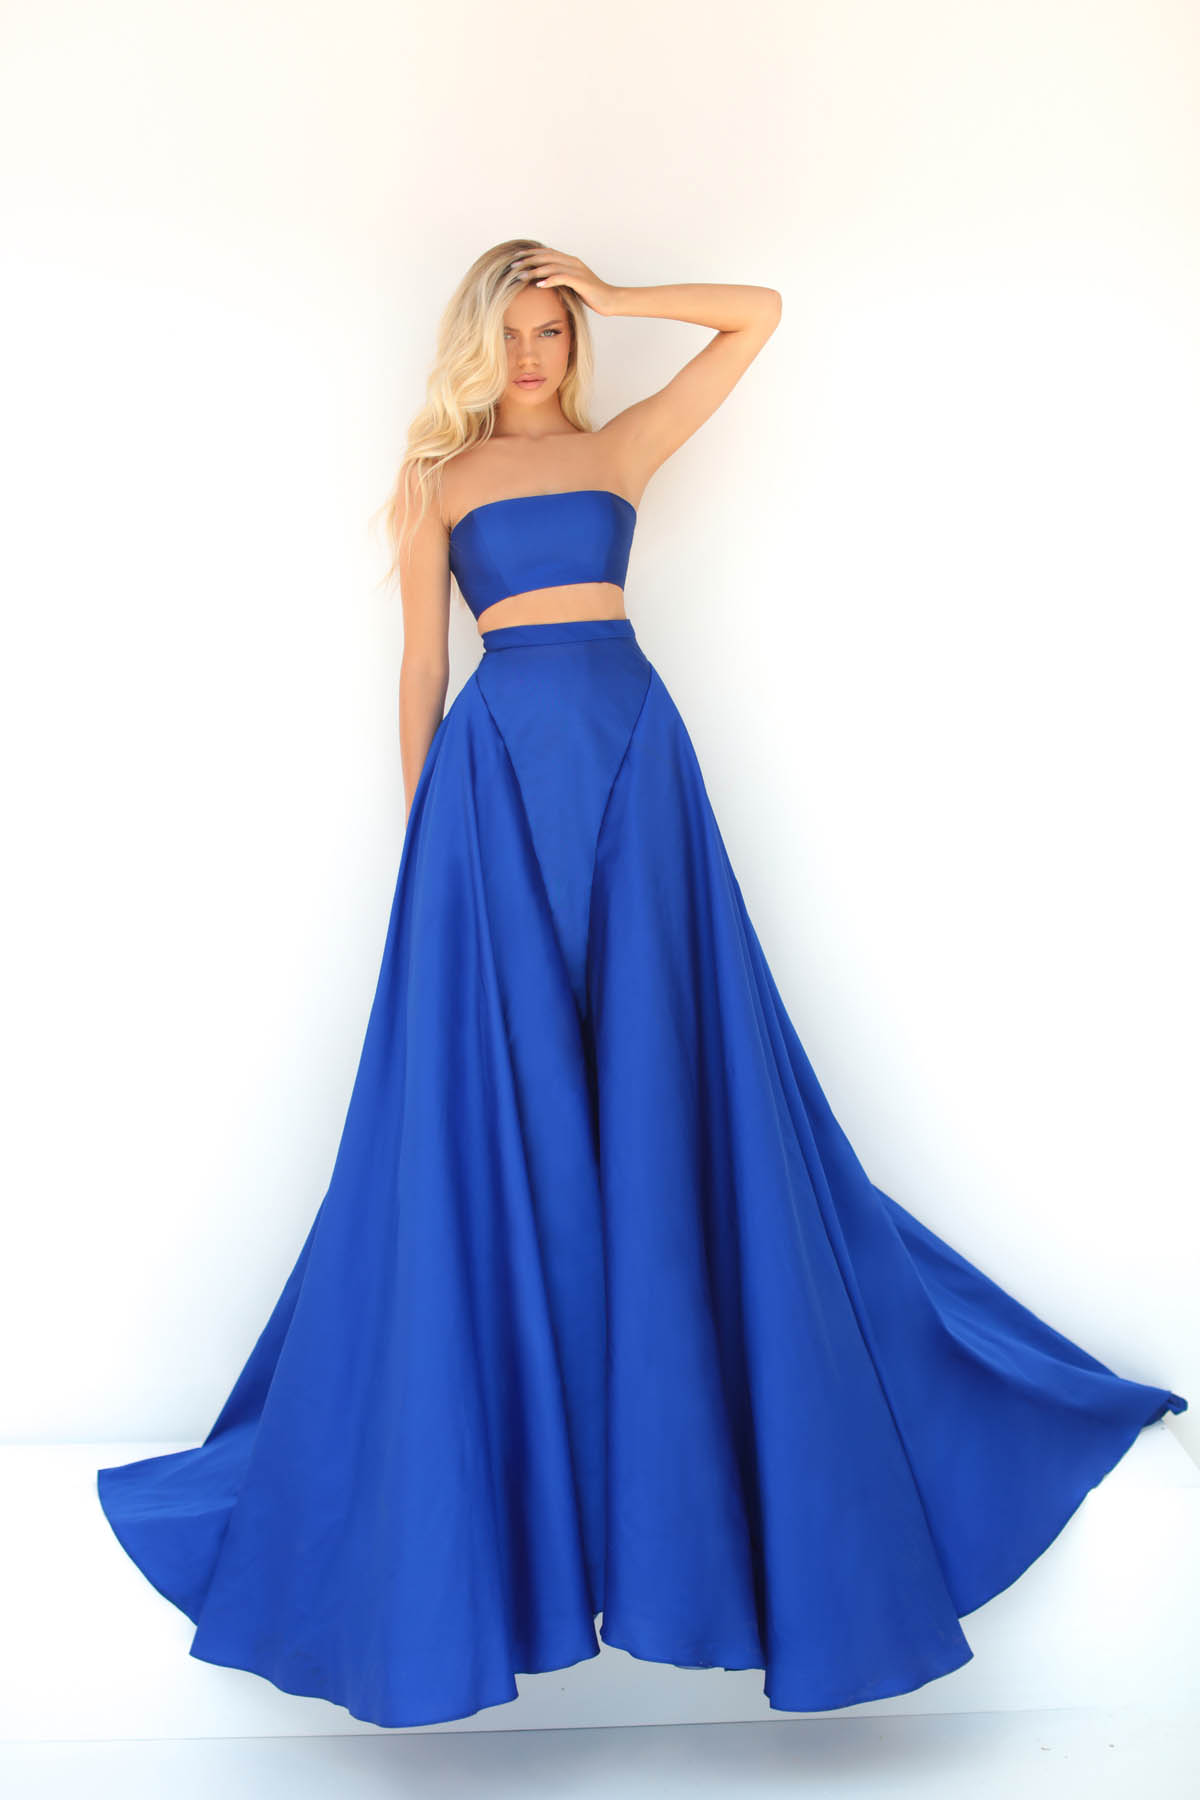 Picture of Royal Blue Dress